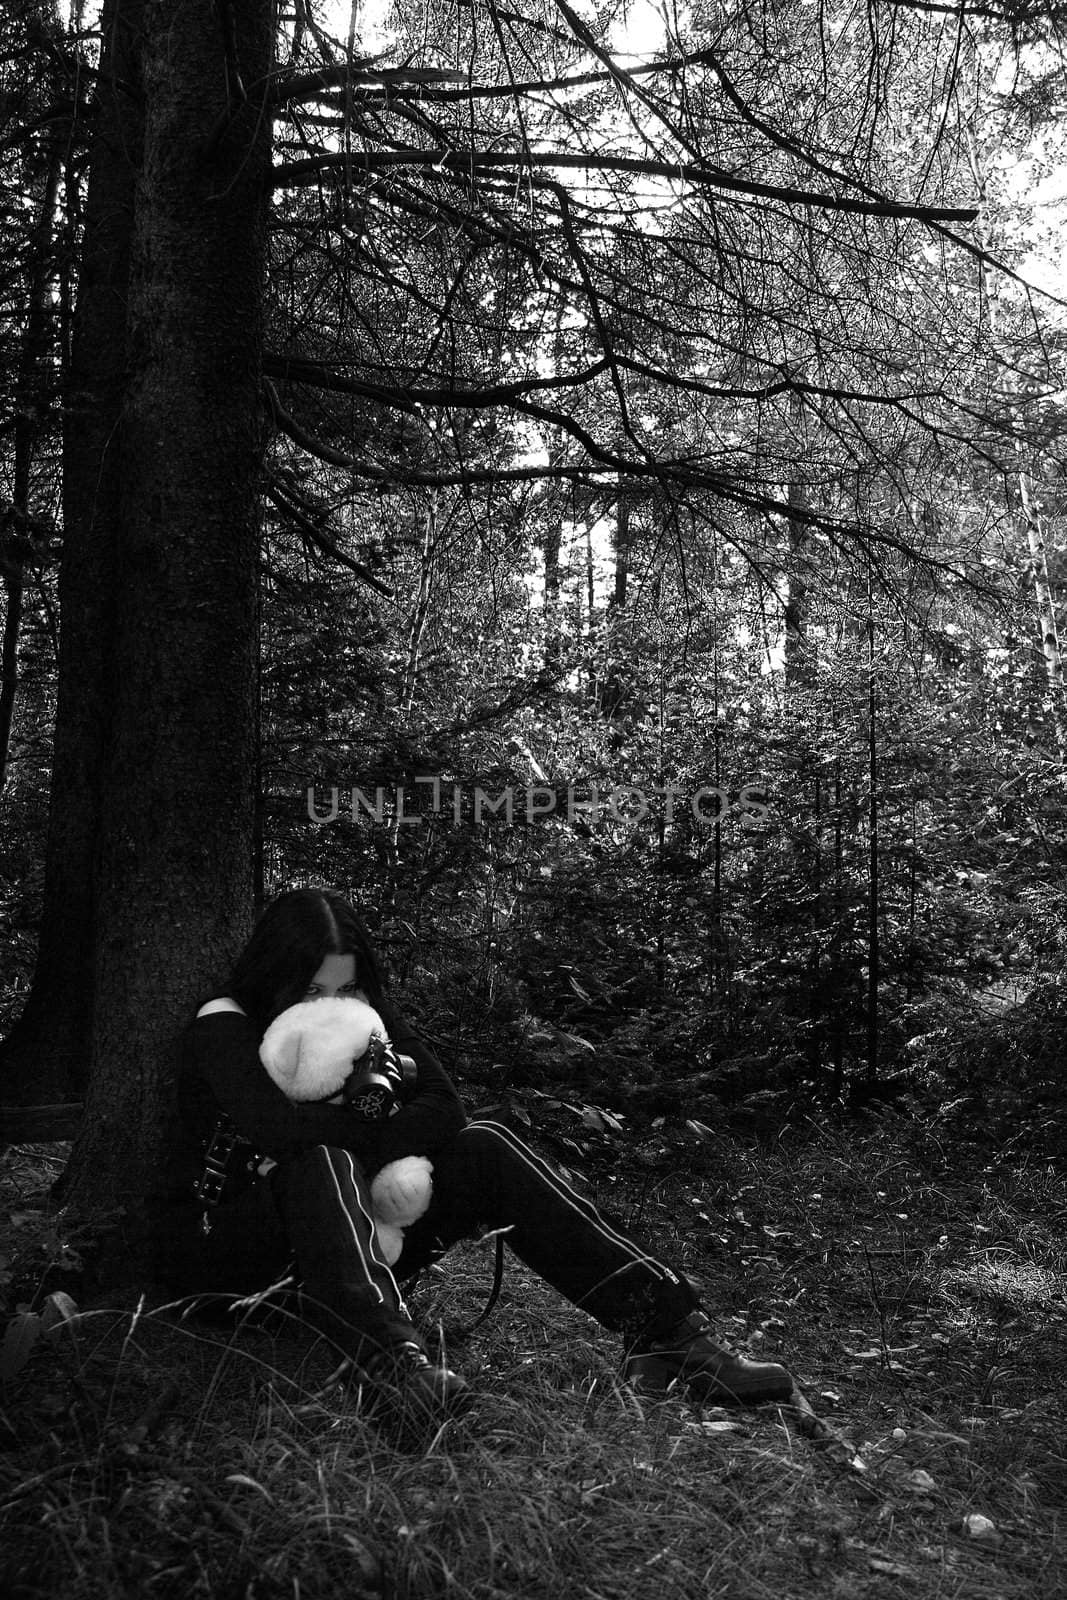 black and white portrait of a twenty something girl dress in goth fashion with a white teddy bear wearing a gaz mask, while being scared lost in the woods